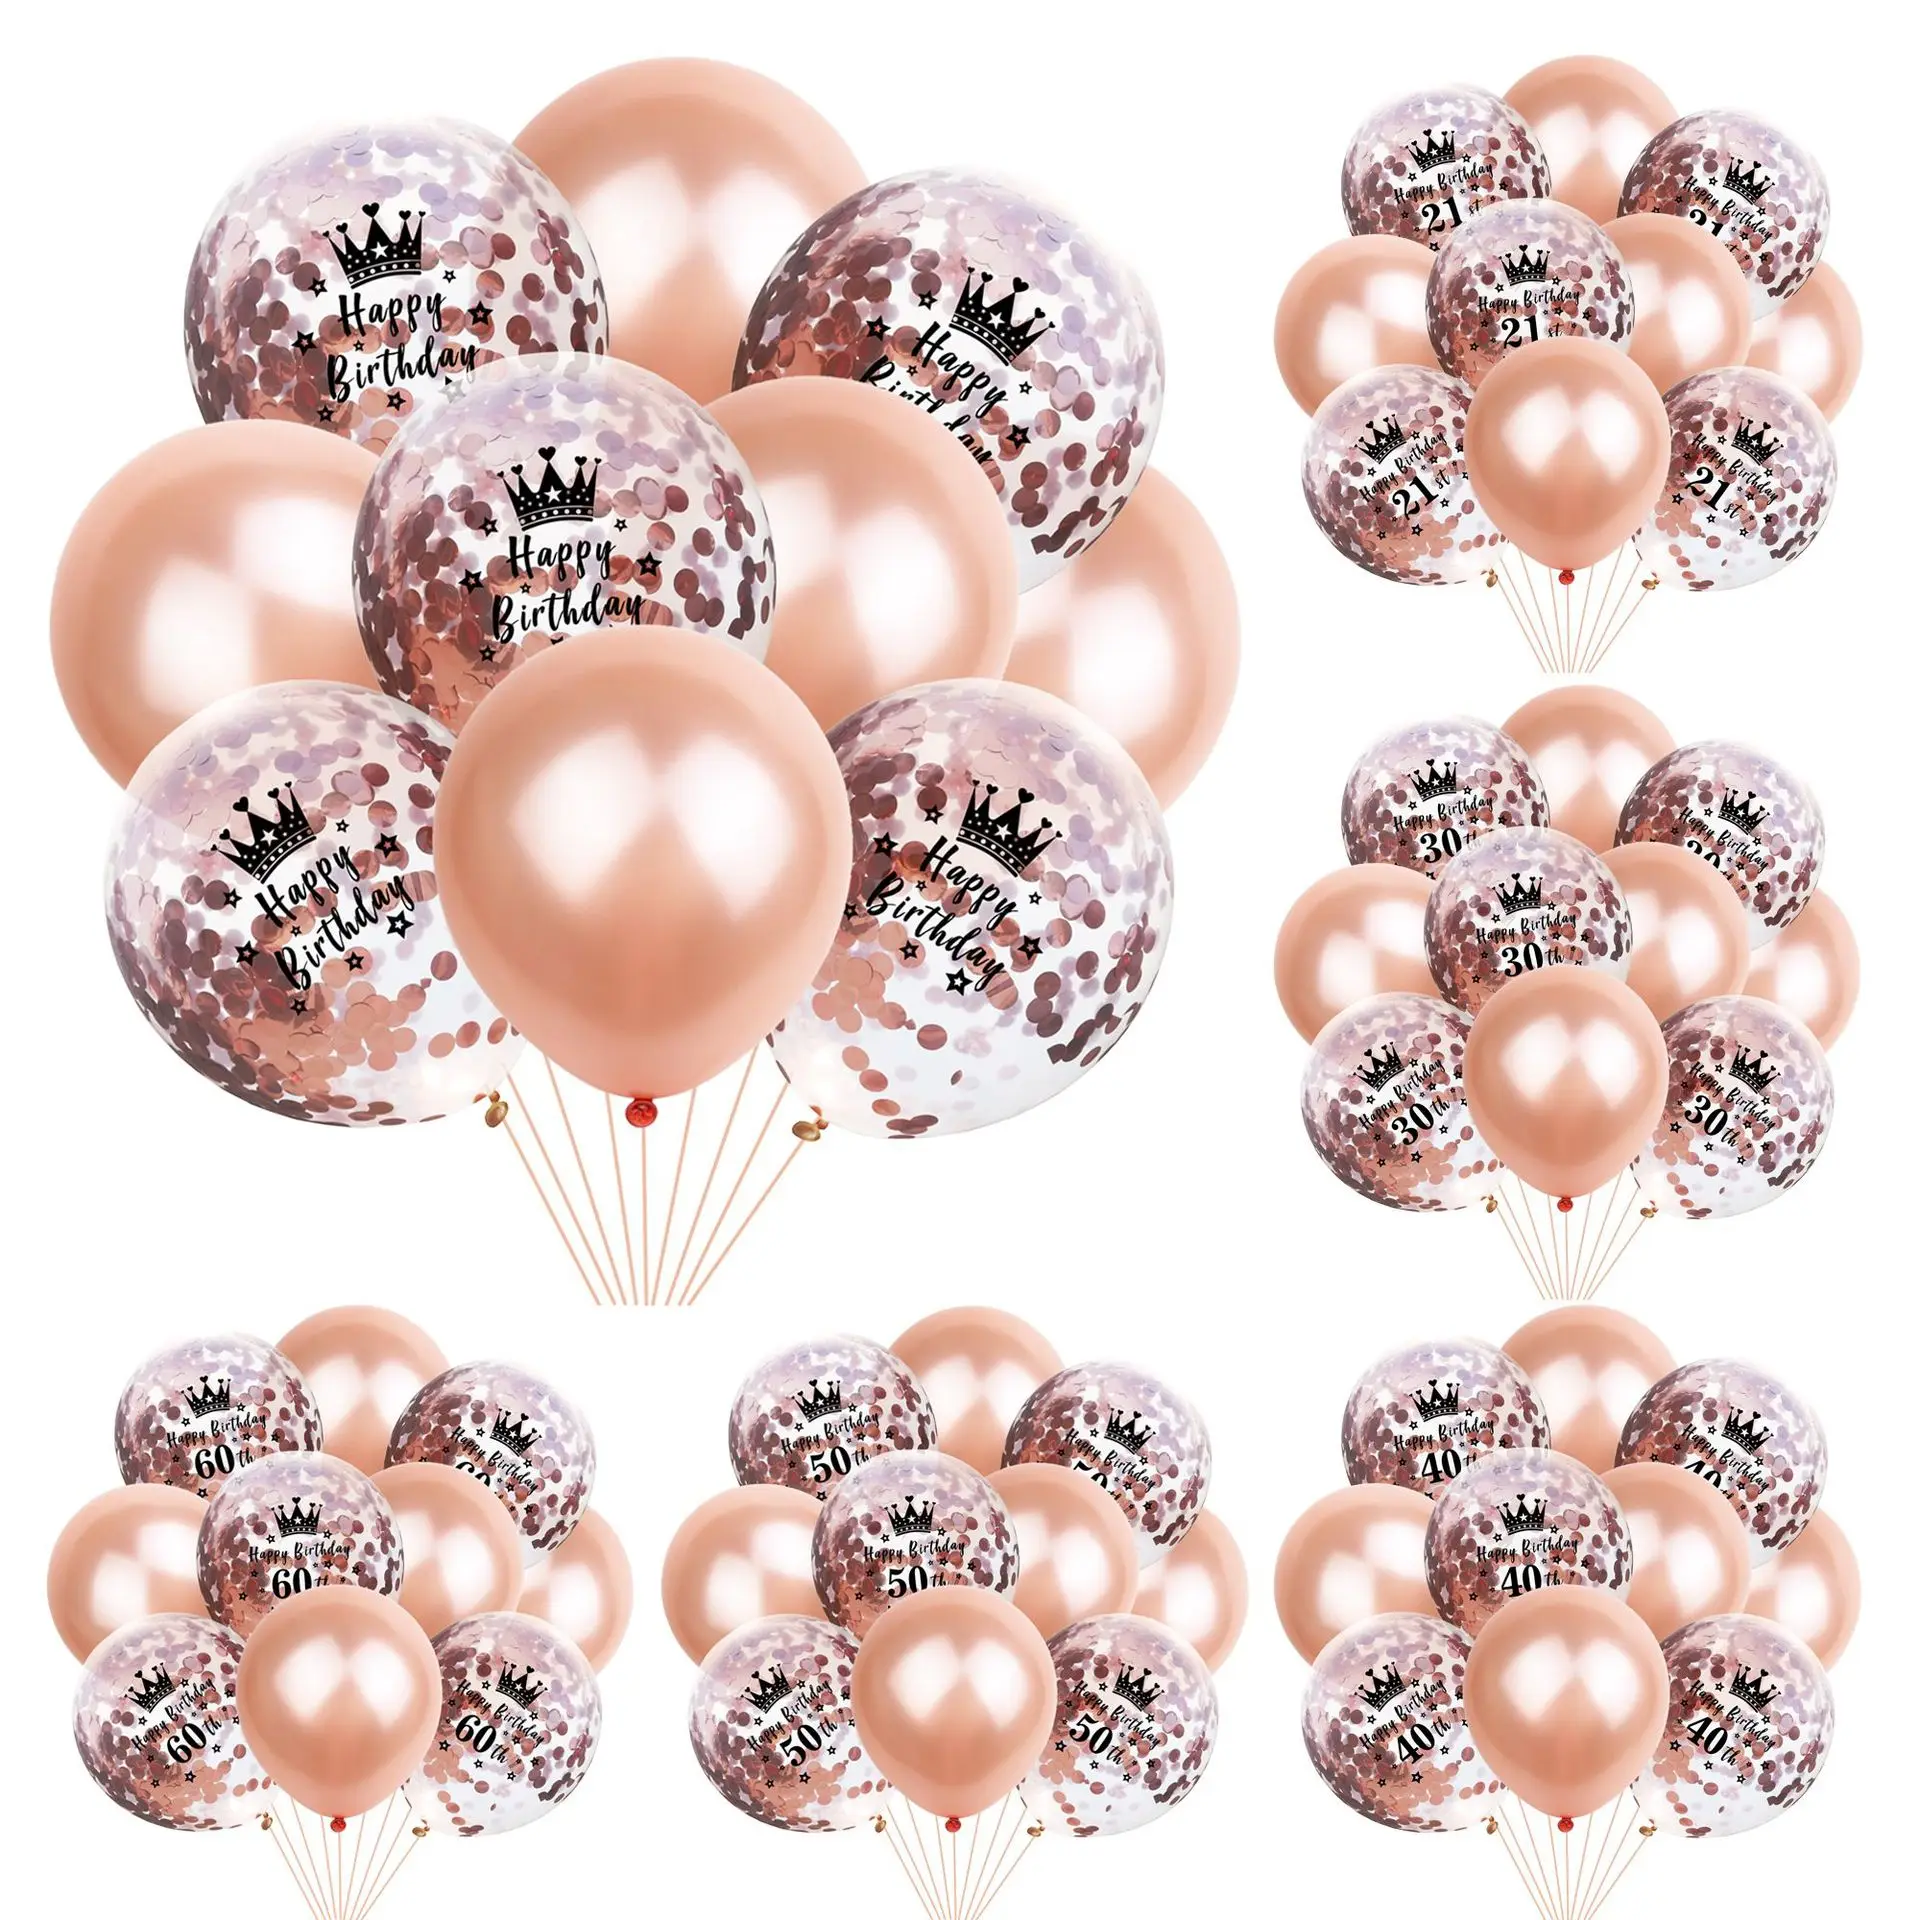 

10PCS Rose Gold Crown 30 40 50 Years Old Birthday Balloons 30th 40th 50th Birthday Party Decoration Heart Star Happy Birthday